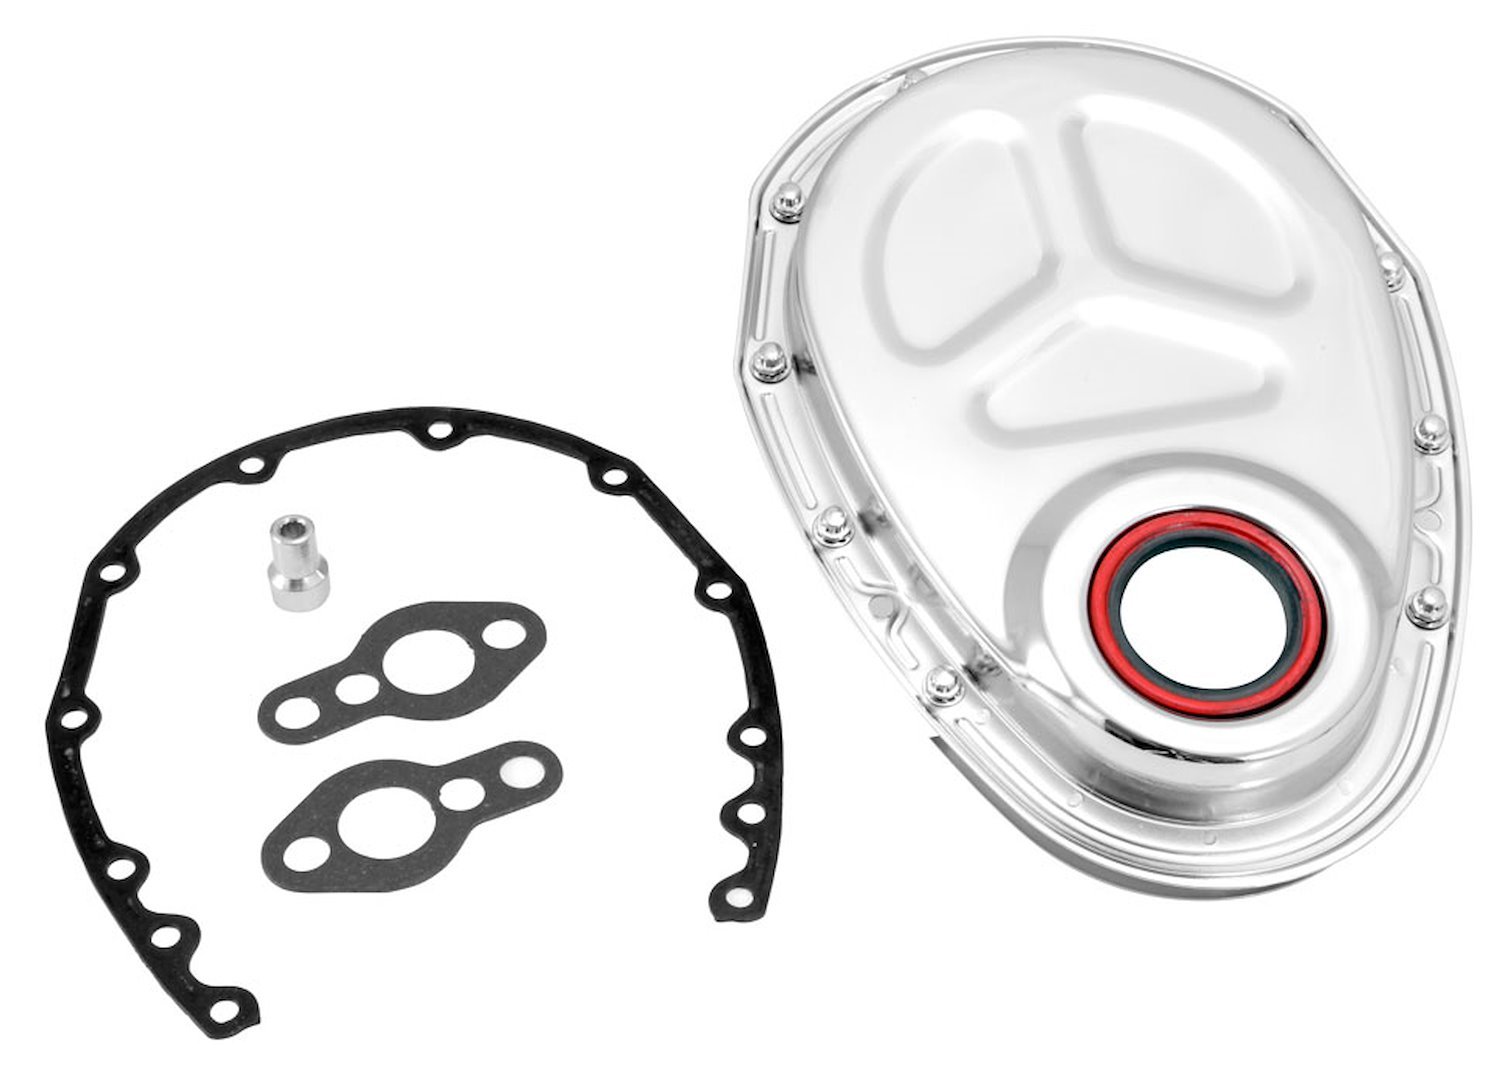 Chrome-Plated Timing Cover Kit 1958-86 SB-Chevy